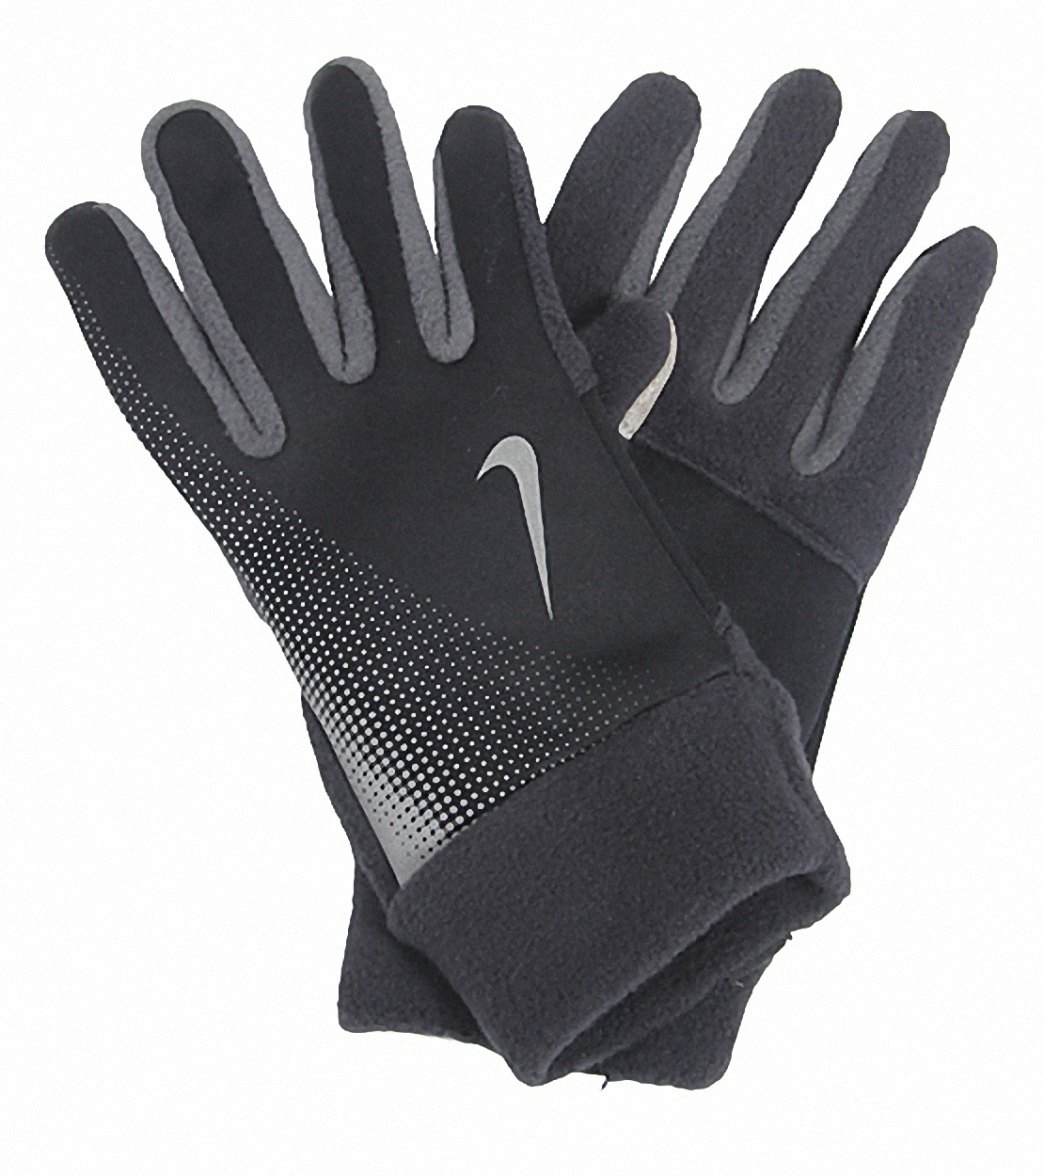 Nike Women's Thermal Tech Running Gloves at SwimOutlet.com